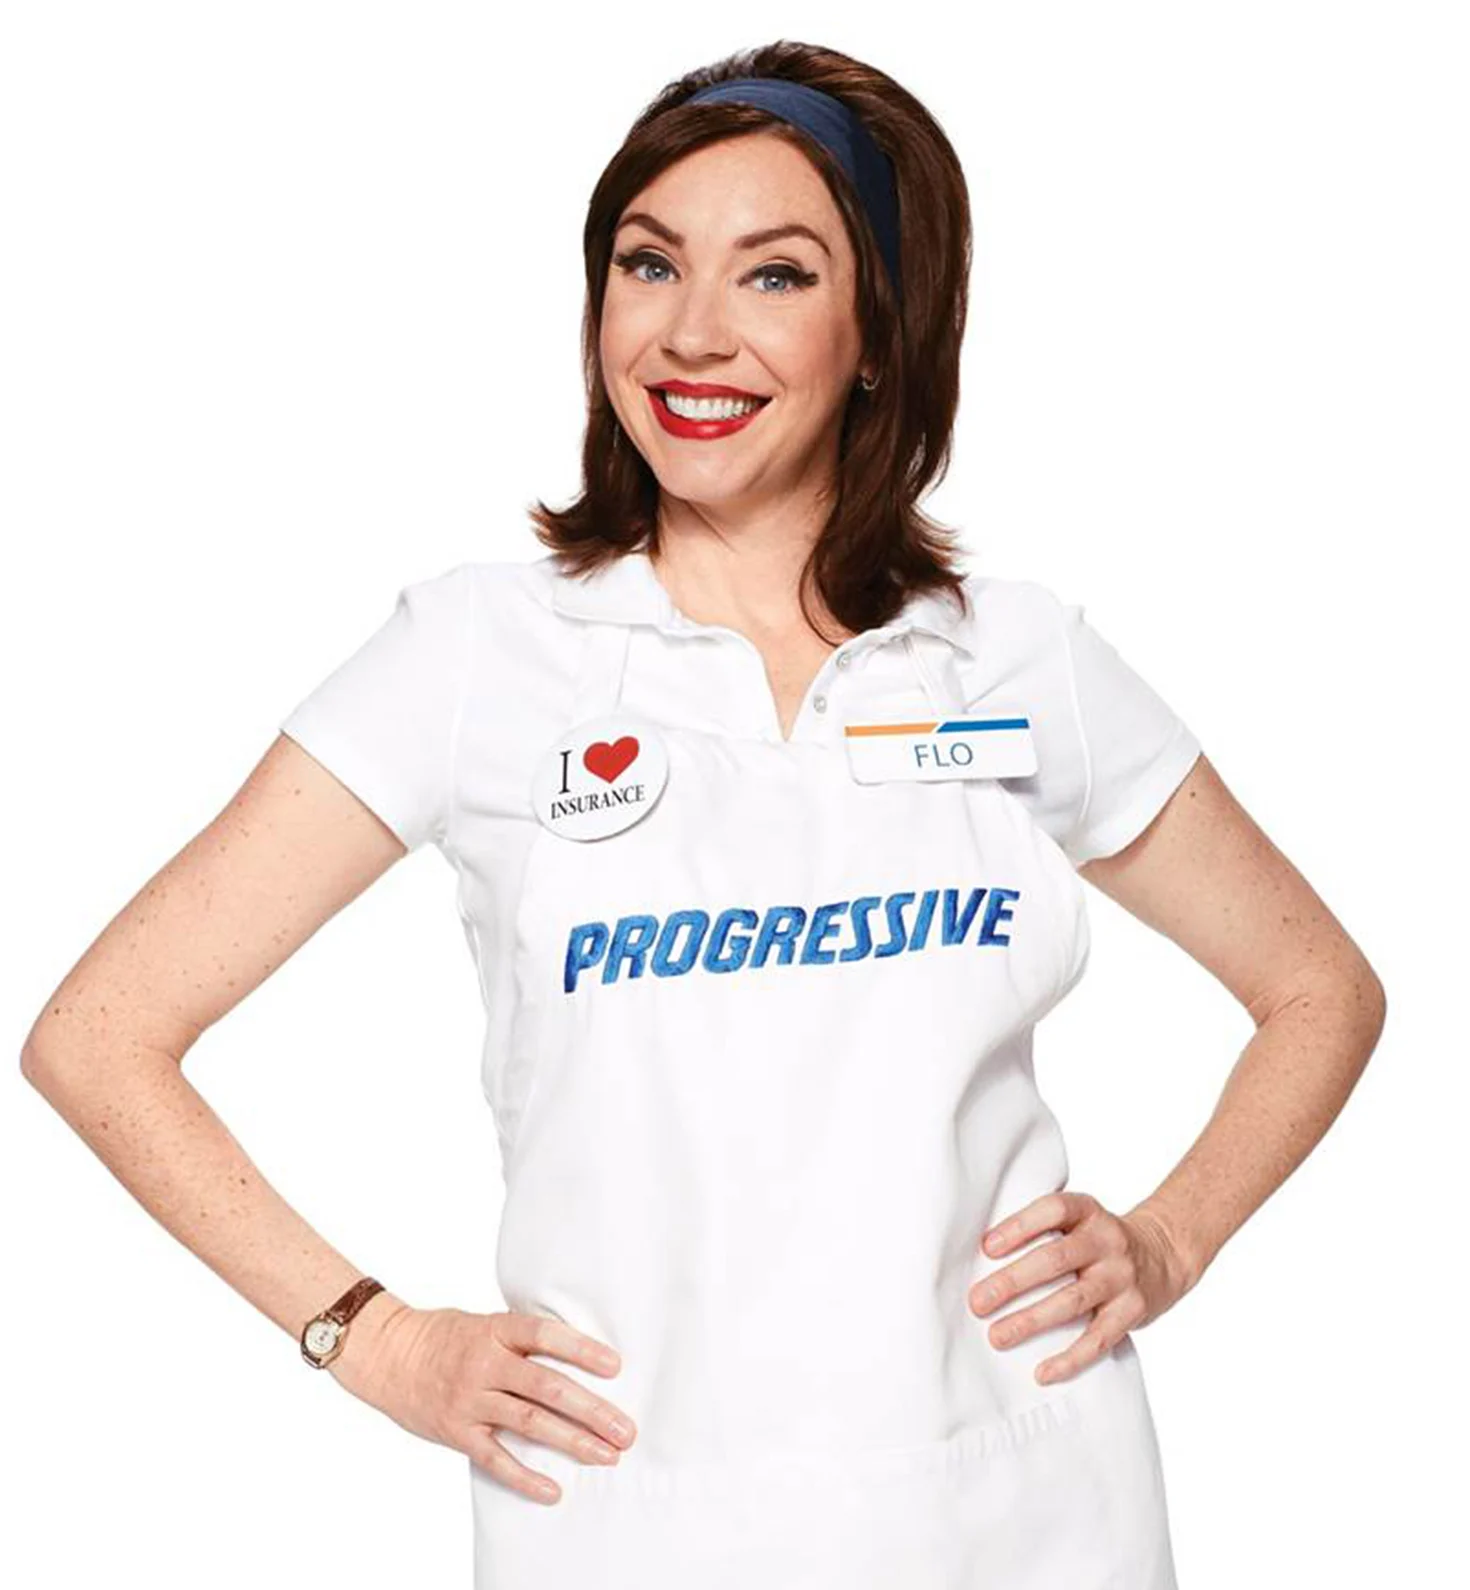 What Is Flo from Progressive Net Worth?